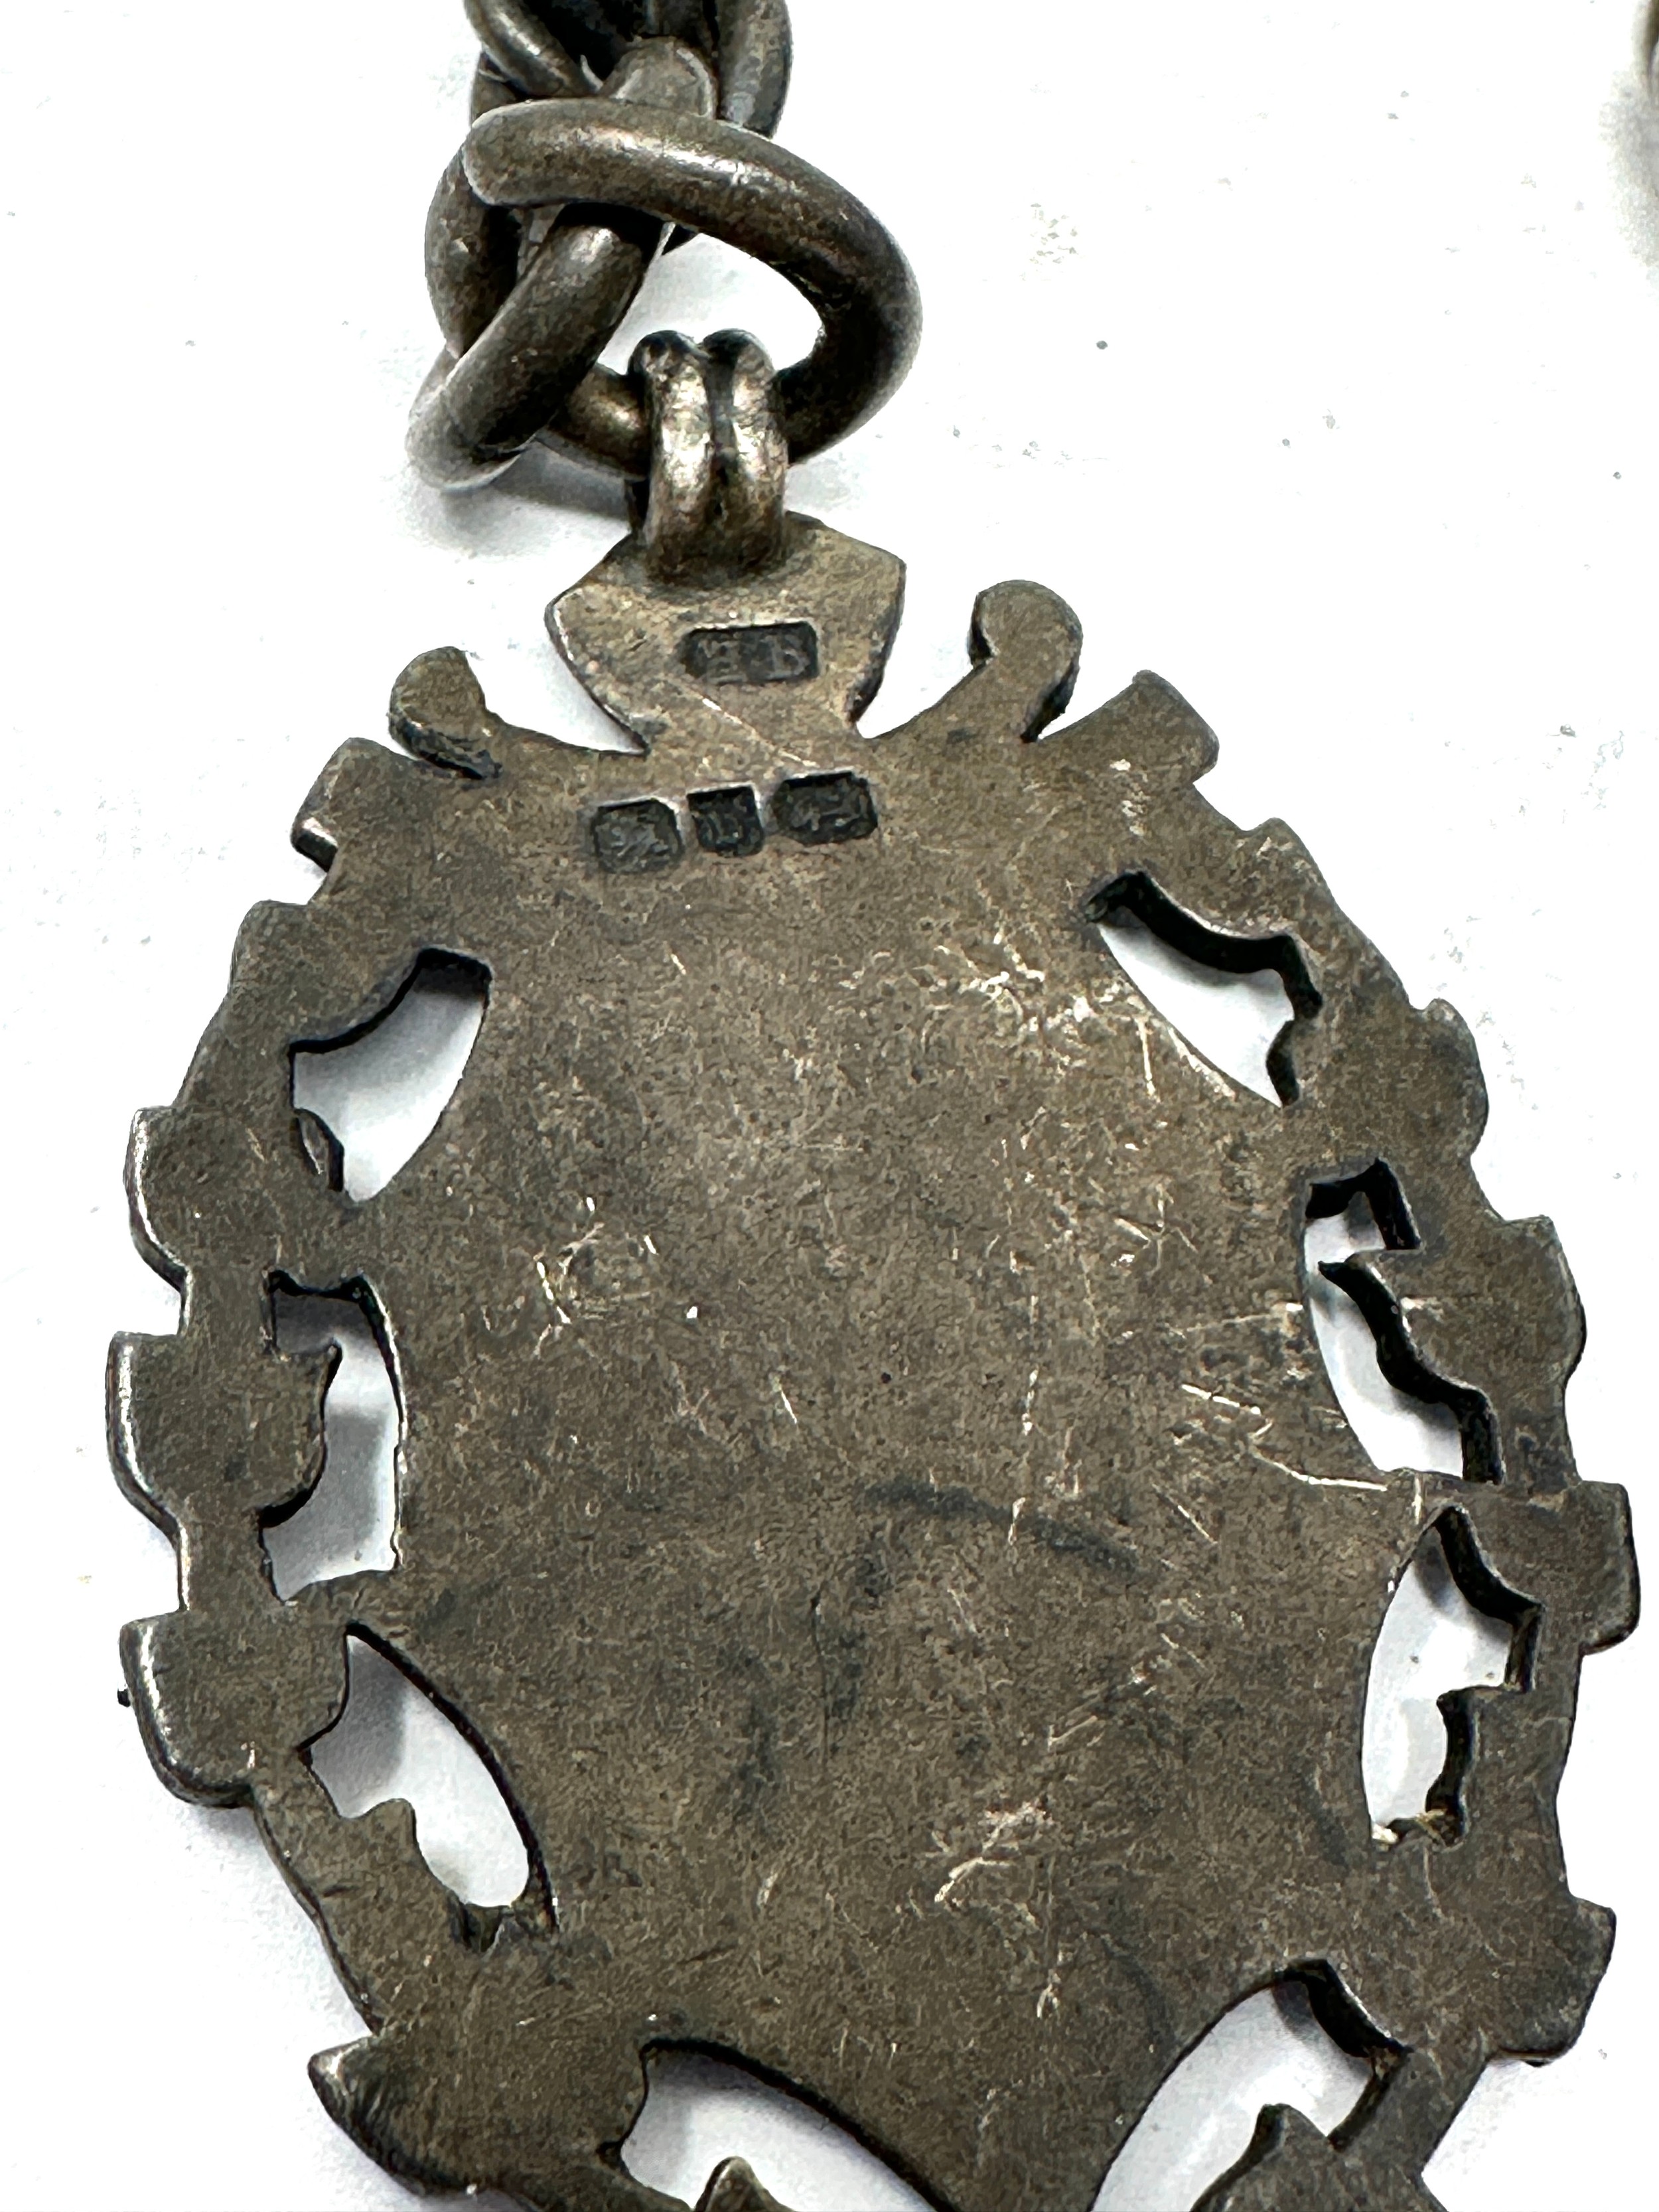 Antique silver albert chain and fob weight 55g - Image 2 of 3